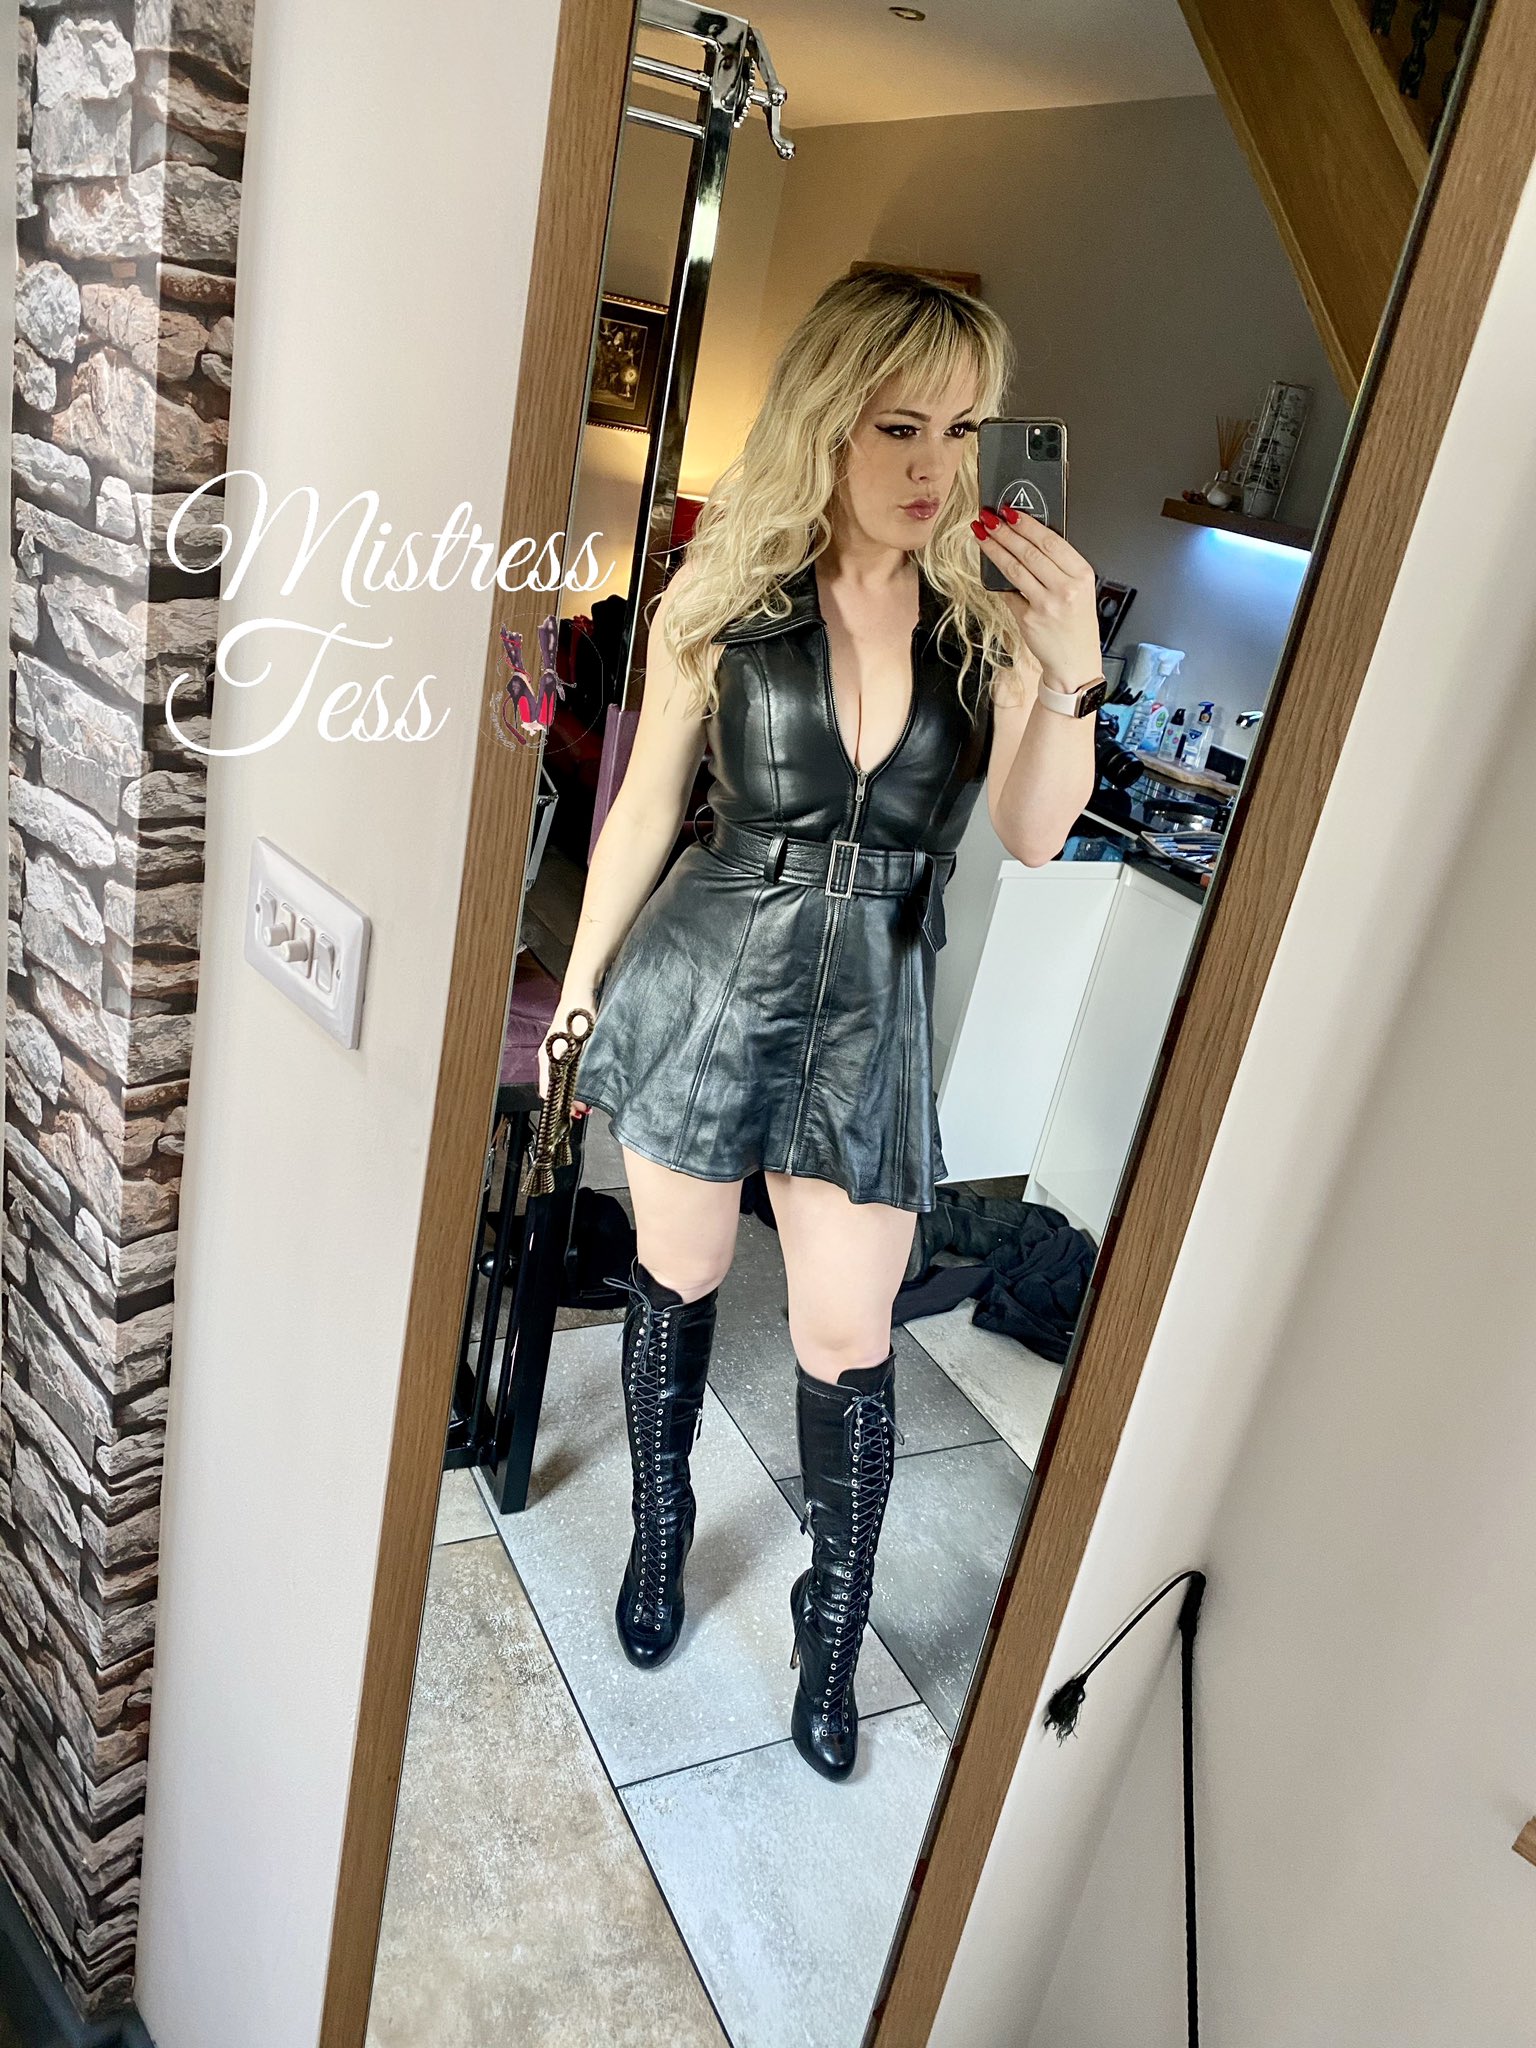 Mistress Courtney Domme Addiction Daily Fix Wednesday November 18th 2020 Domme Addiction 2205